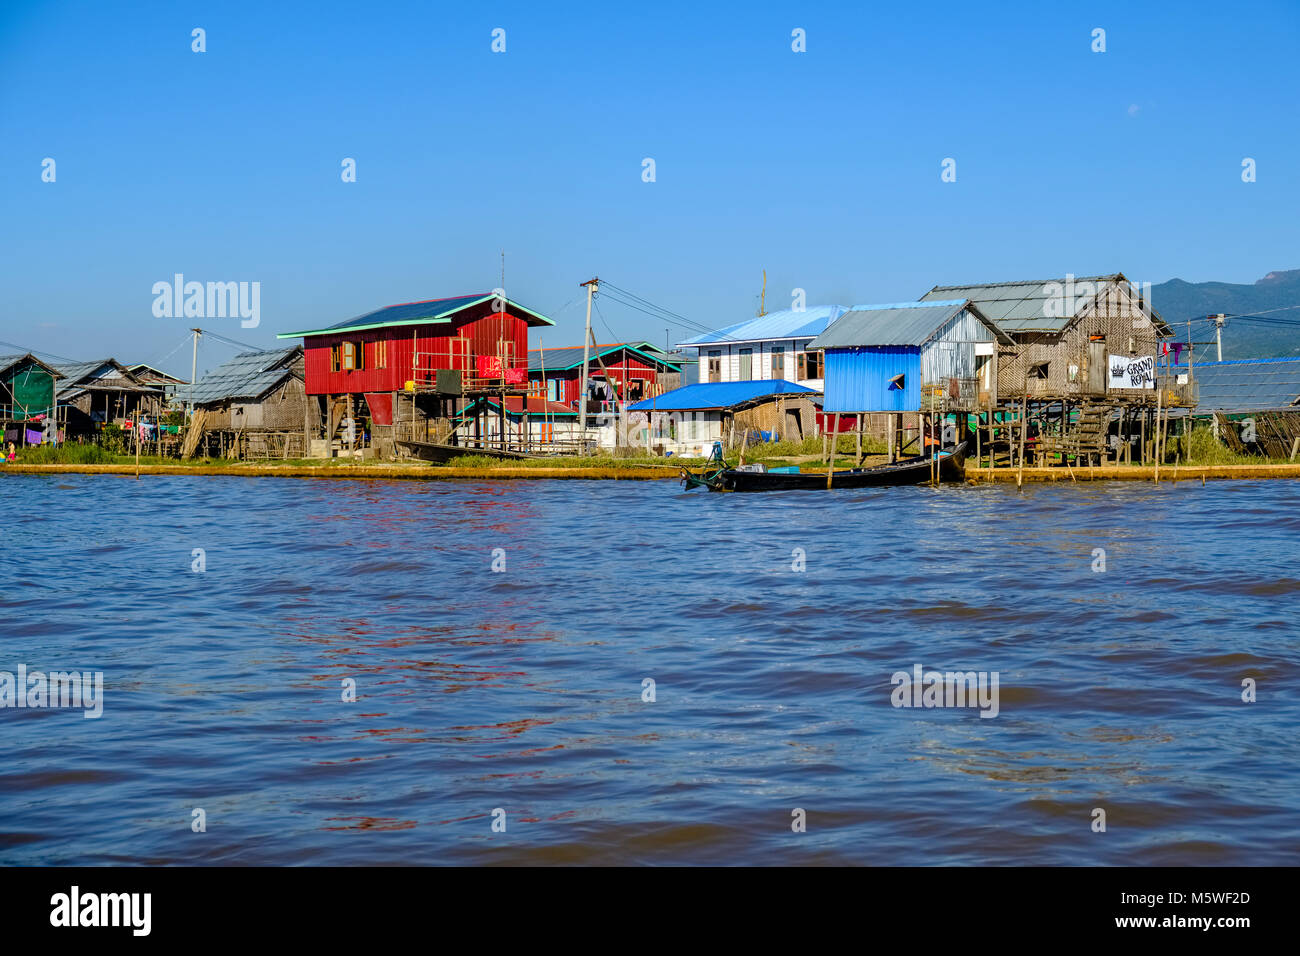 Houses of the local fishermen are situated along the main channel Stock Photo